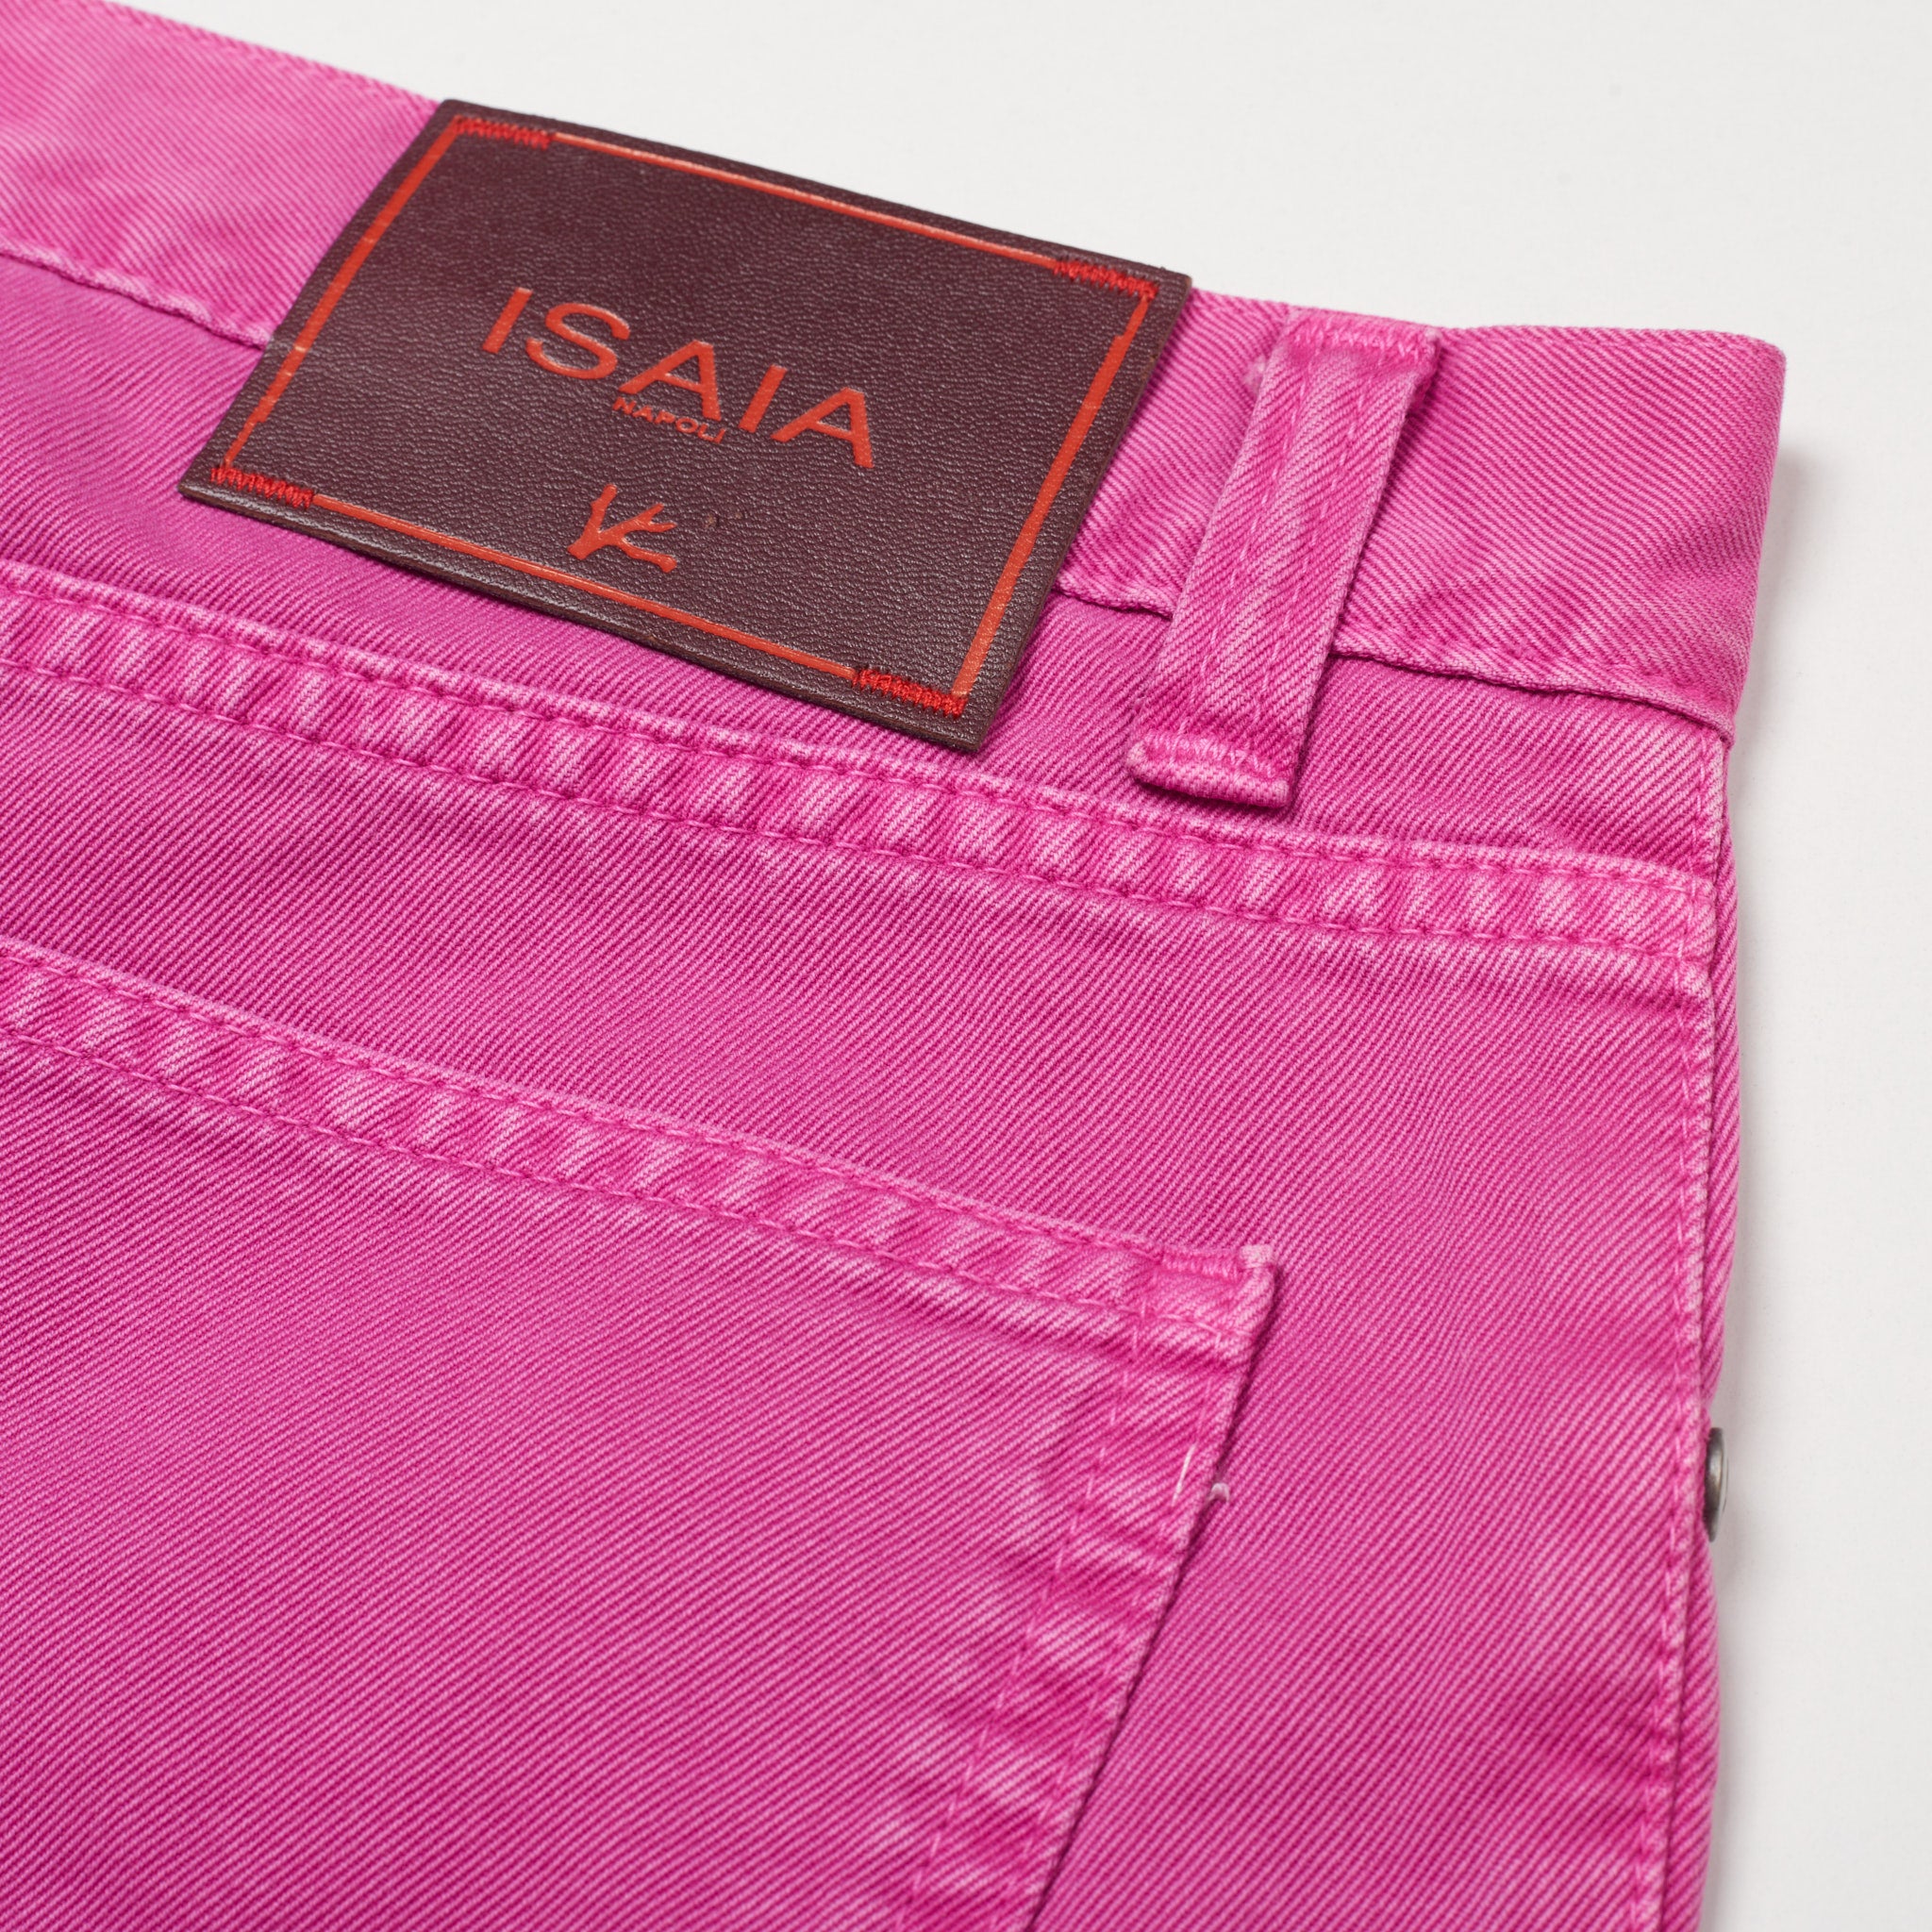 ISAIA Napoli Pink Denim Selvedge Jeans Pants NEW US 31 Slim Fit ISAIA